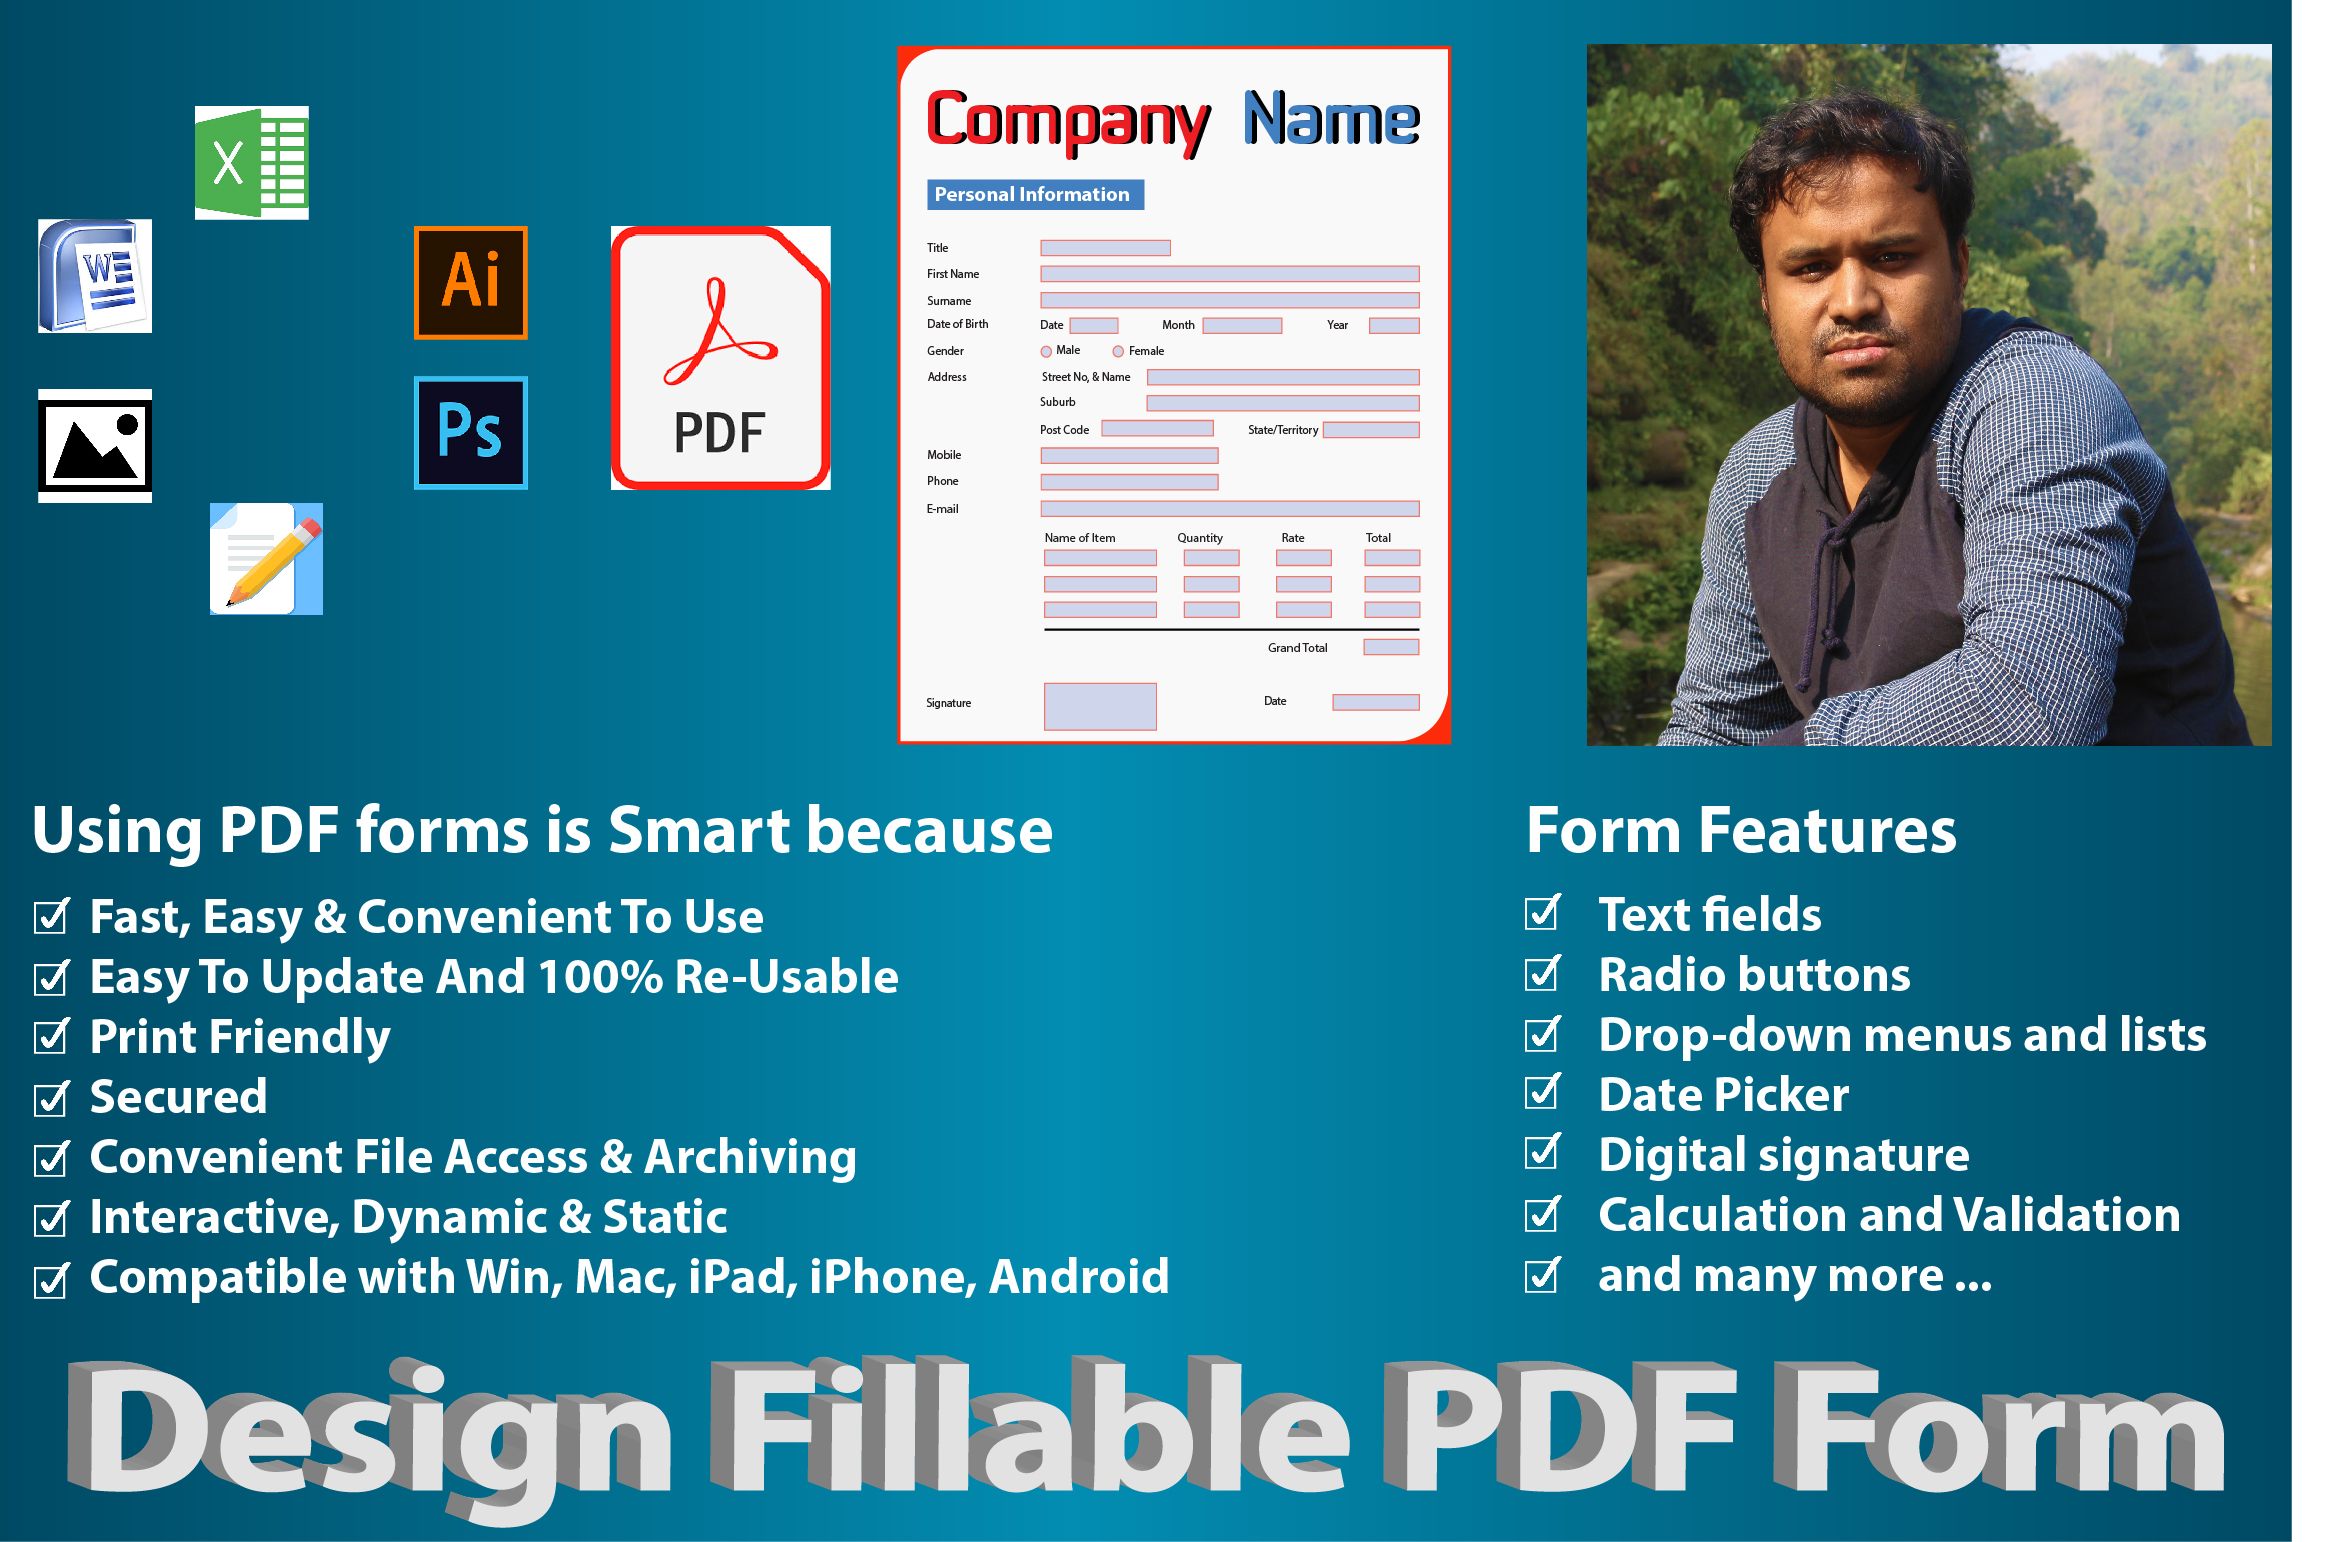 9510I will create and design fillable pdf forms